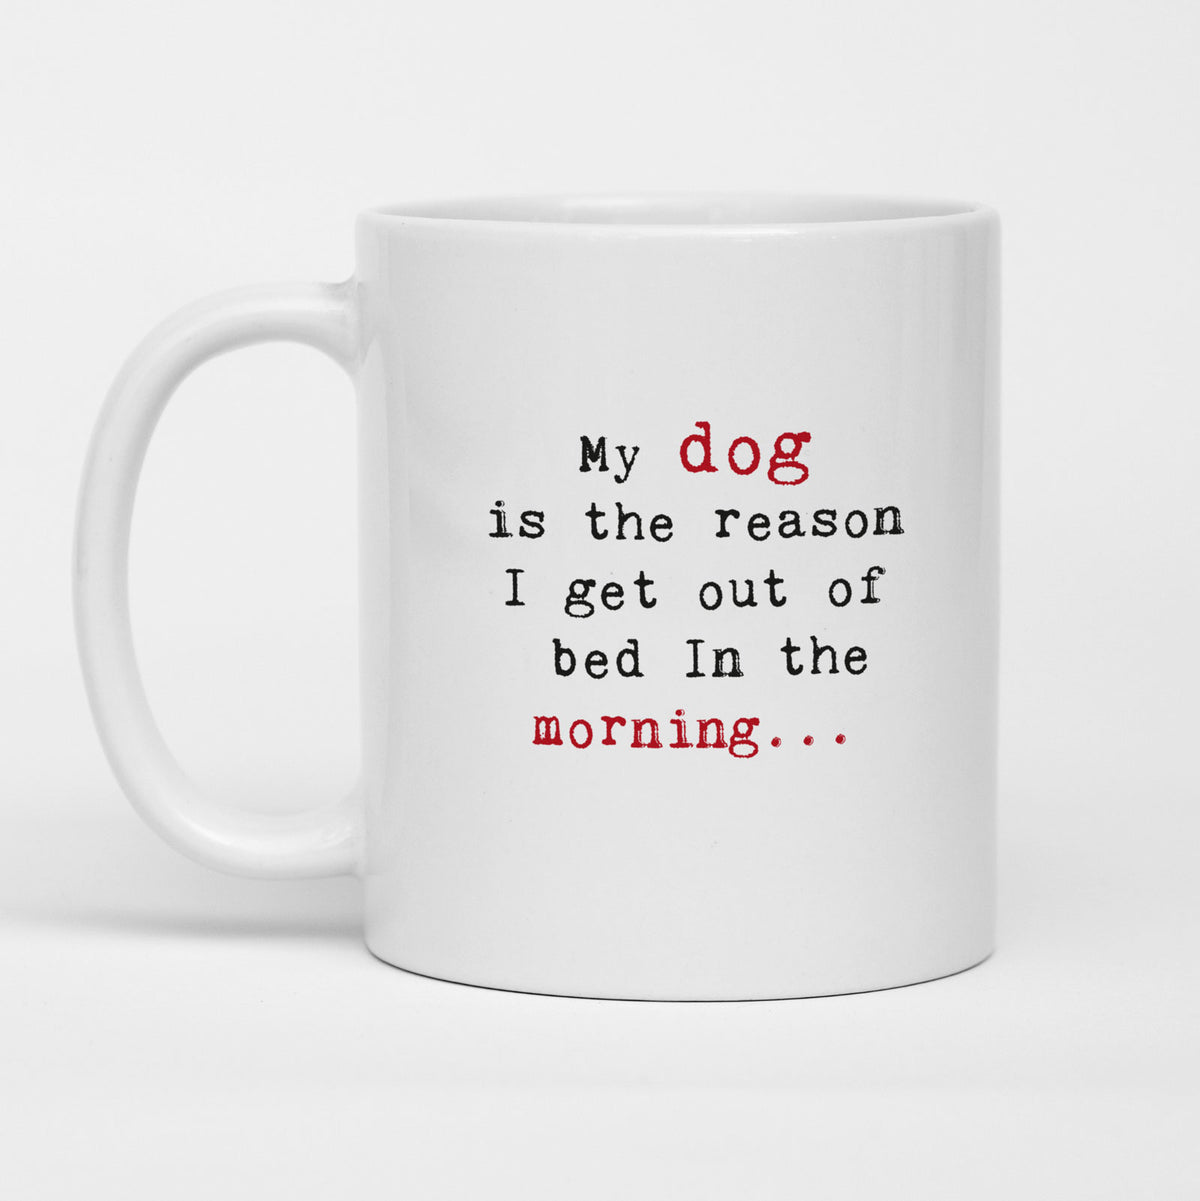 My dog is the reason I get out of bed..., Funny Dog Quote Mug